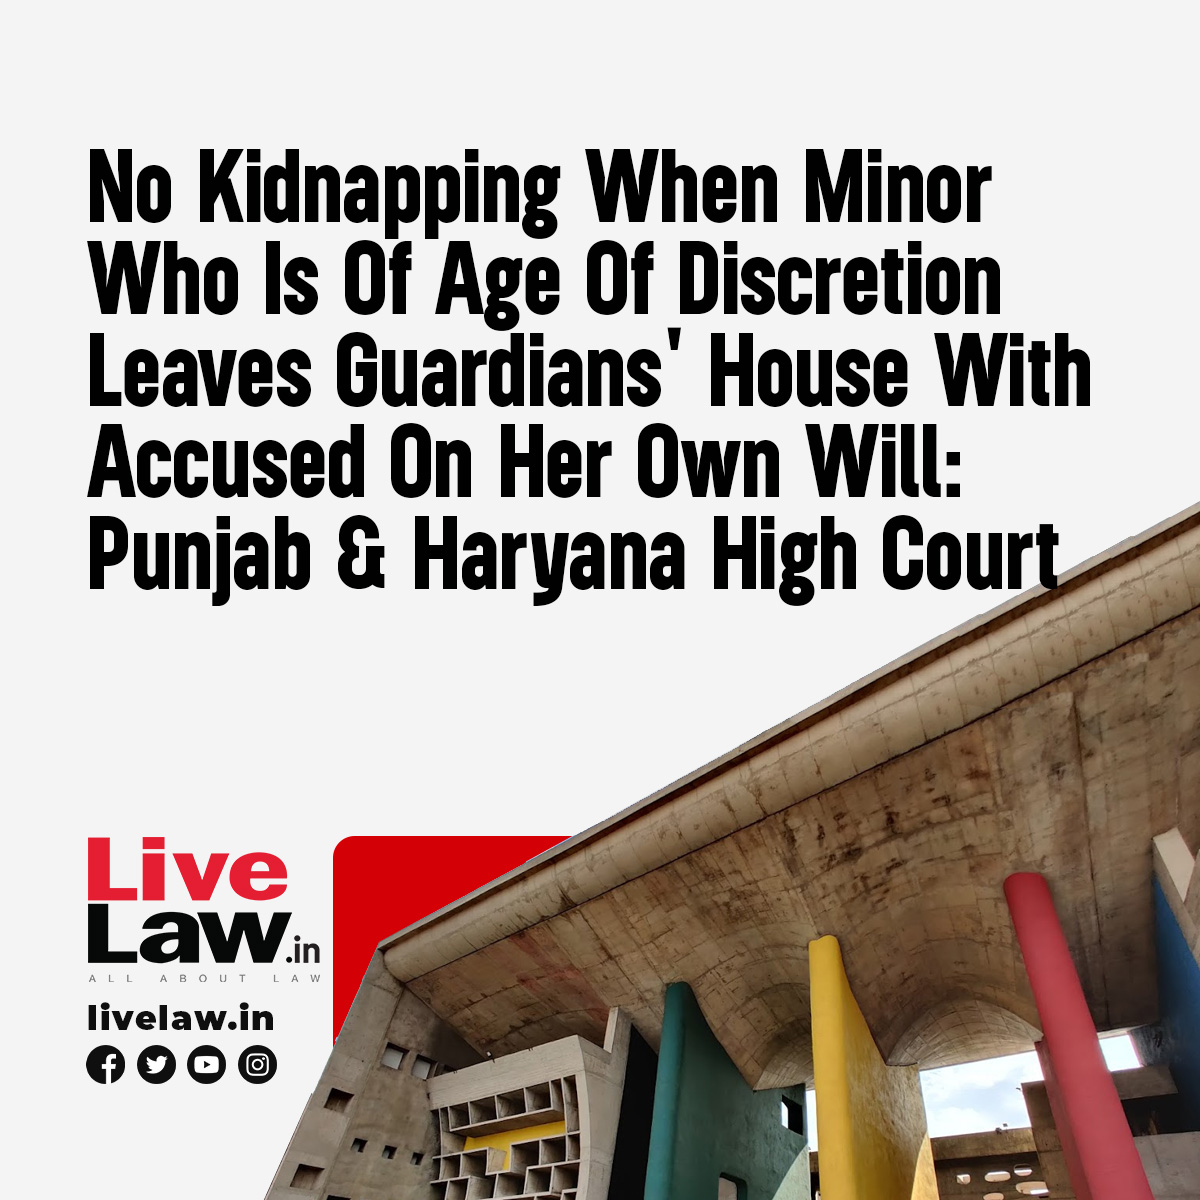 The Punjab and Haryana High Court has said that a person will not be liable for kidnapping if a minor girl of 'age of discretion' leaves her guardian's house along with him on her own volition. Read more: t.ly/P8dDo